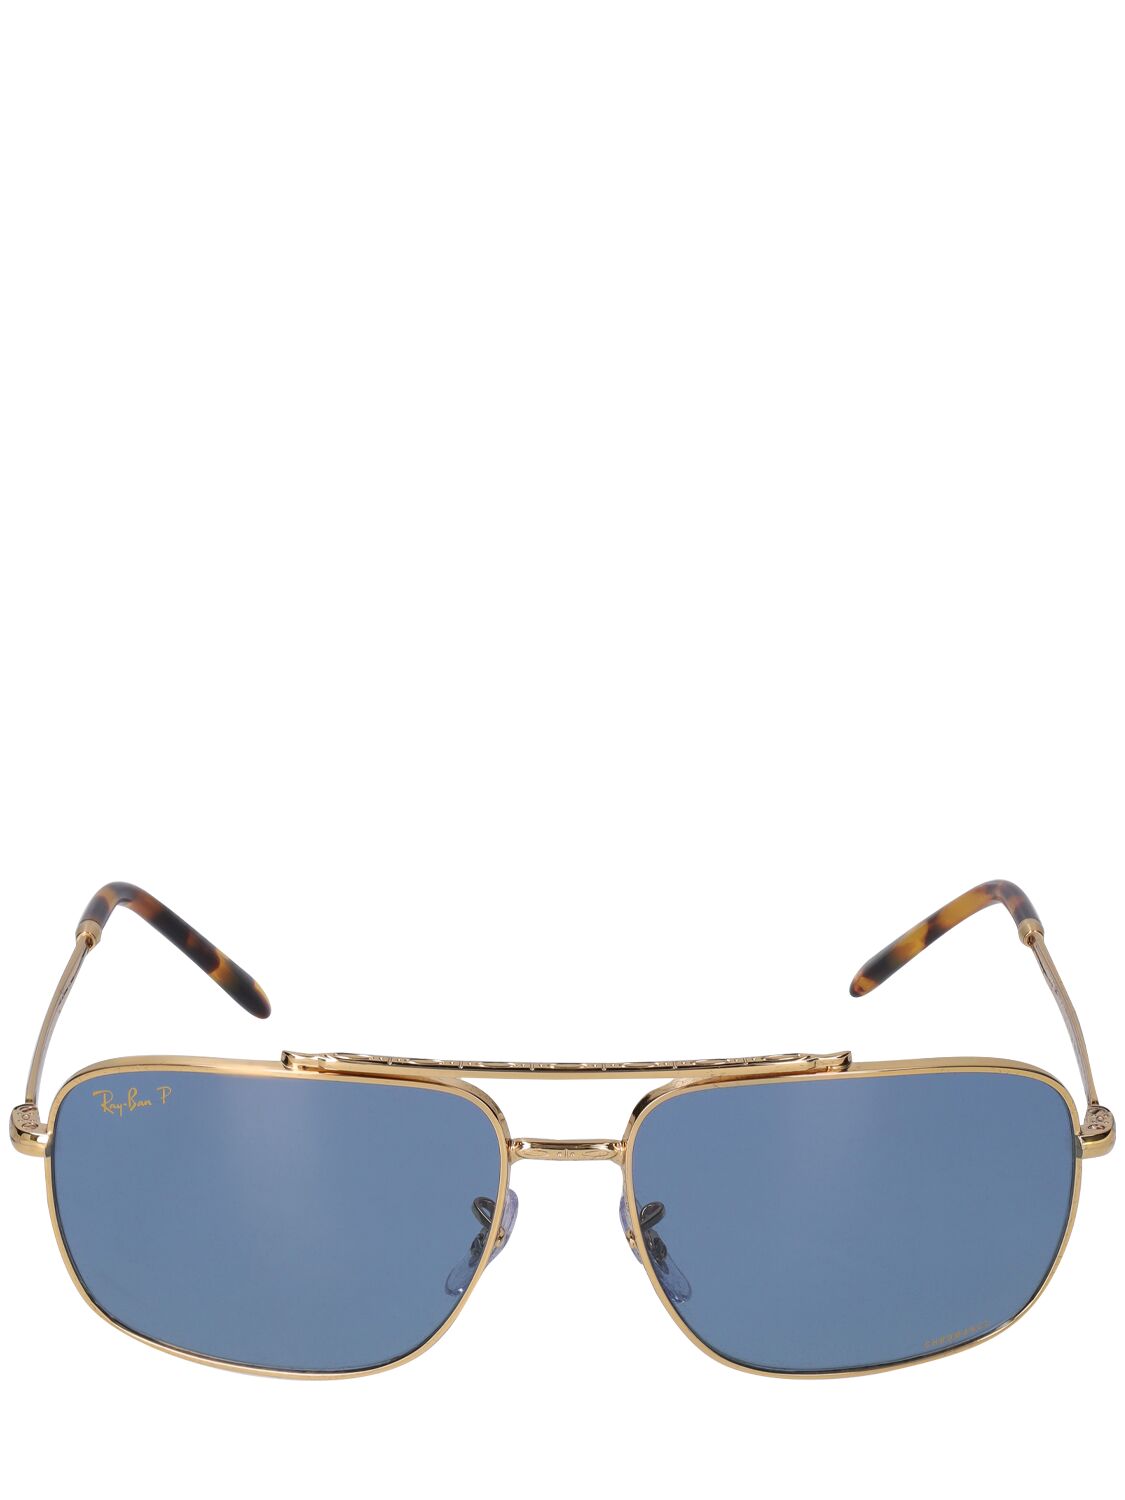 Ray Ban Icons Reinvention Metal Sunglasses In Gold